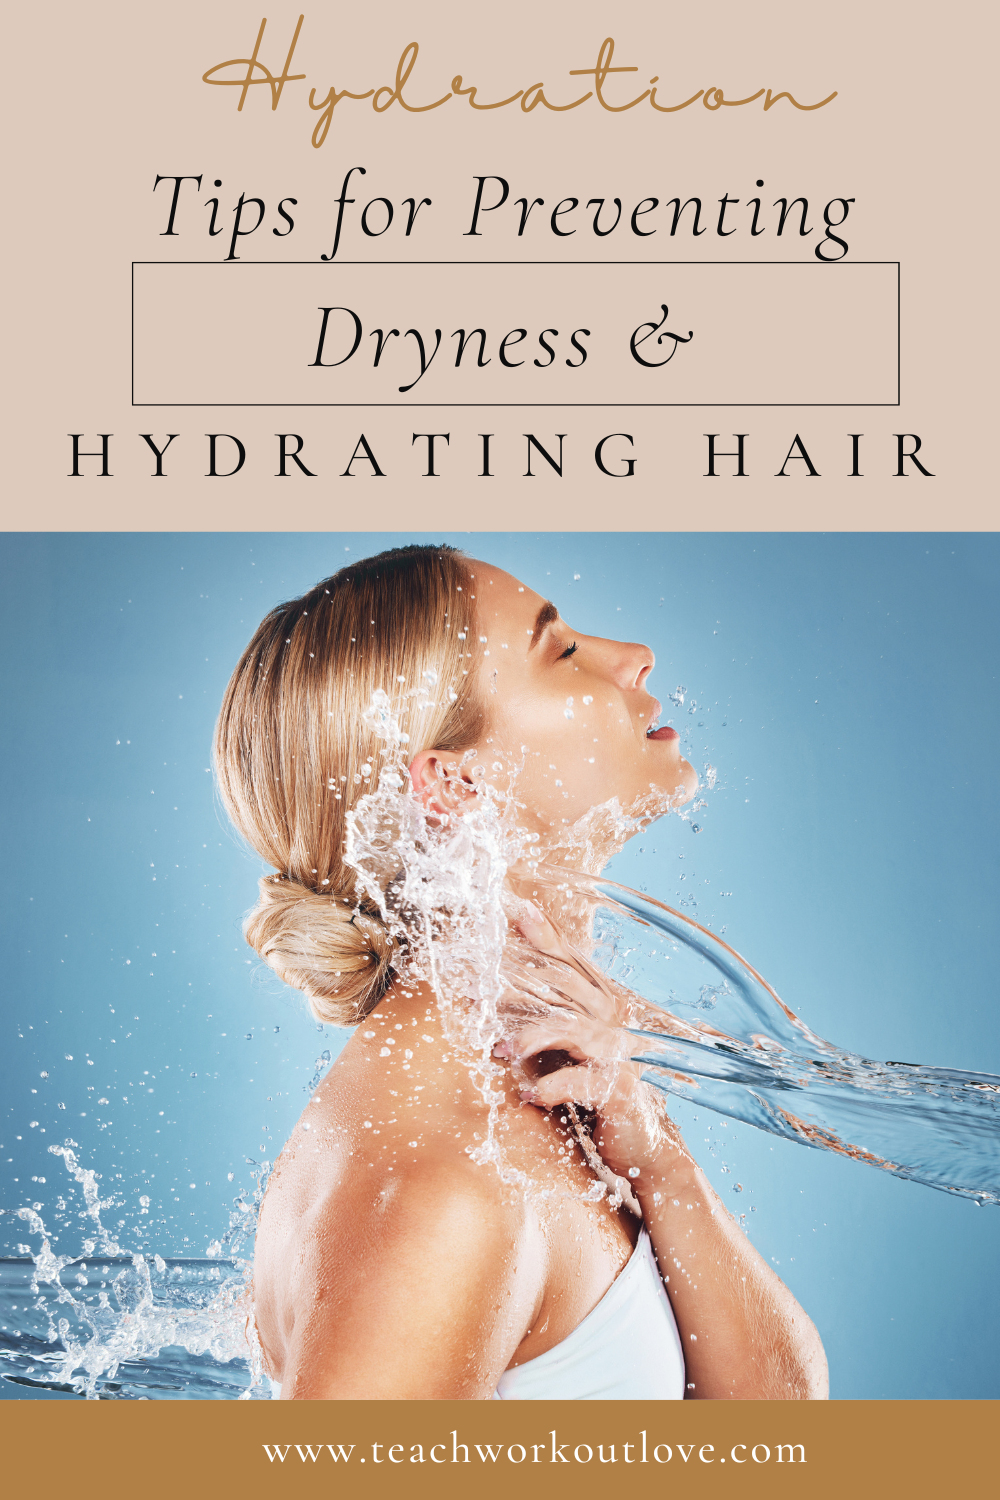 Are you tired of dealing with dry, lifeless hair? You're not alone. Many of us have struggled with dry and thirsty locks at some point. But fear not! There are plenty of tips and tricks to keep your hair hydrated and healthy. And, I've got a secret weapon to share with you – "HYDR-8 - Hydration and repair that won’t wash away."